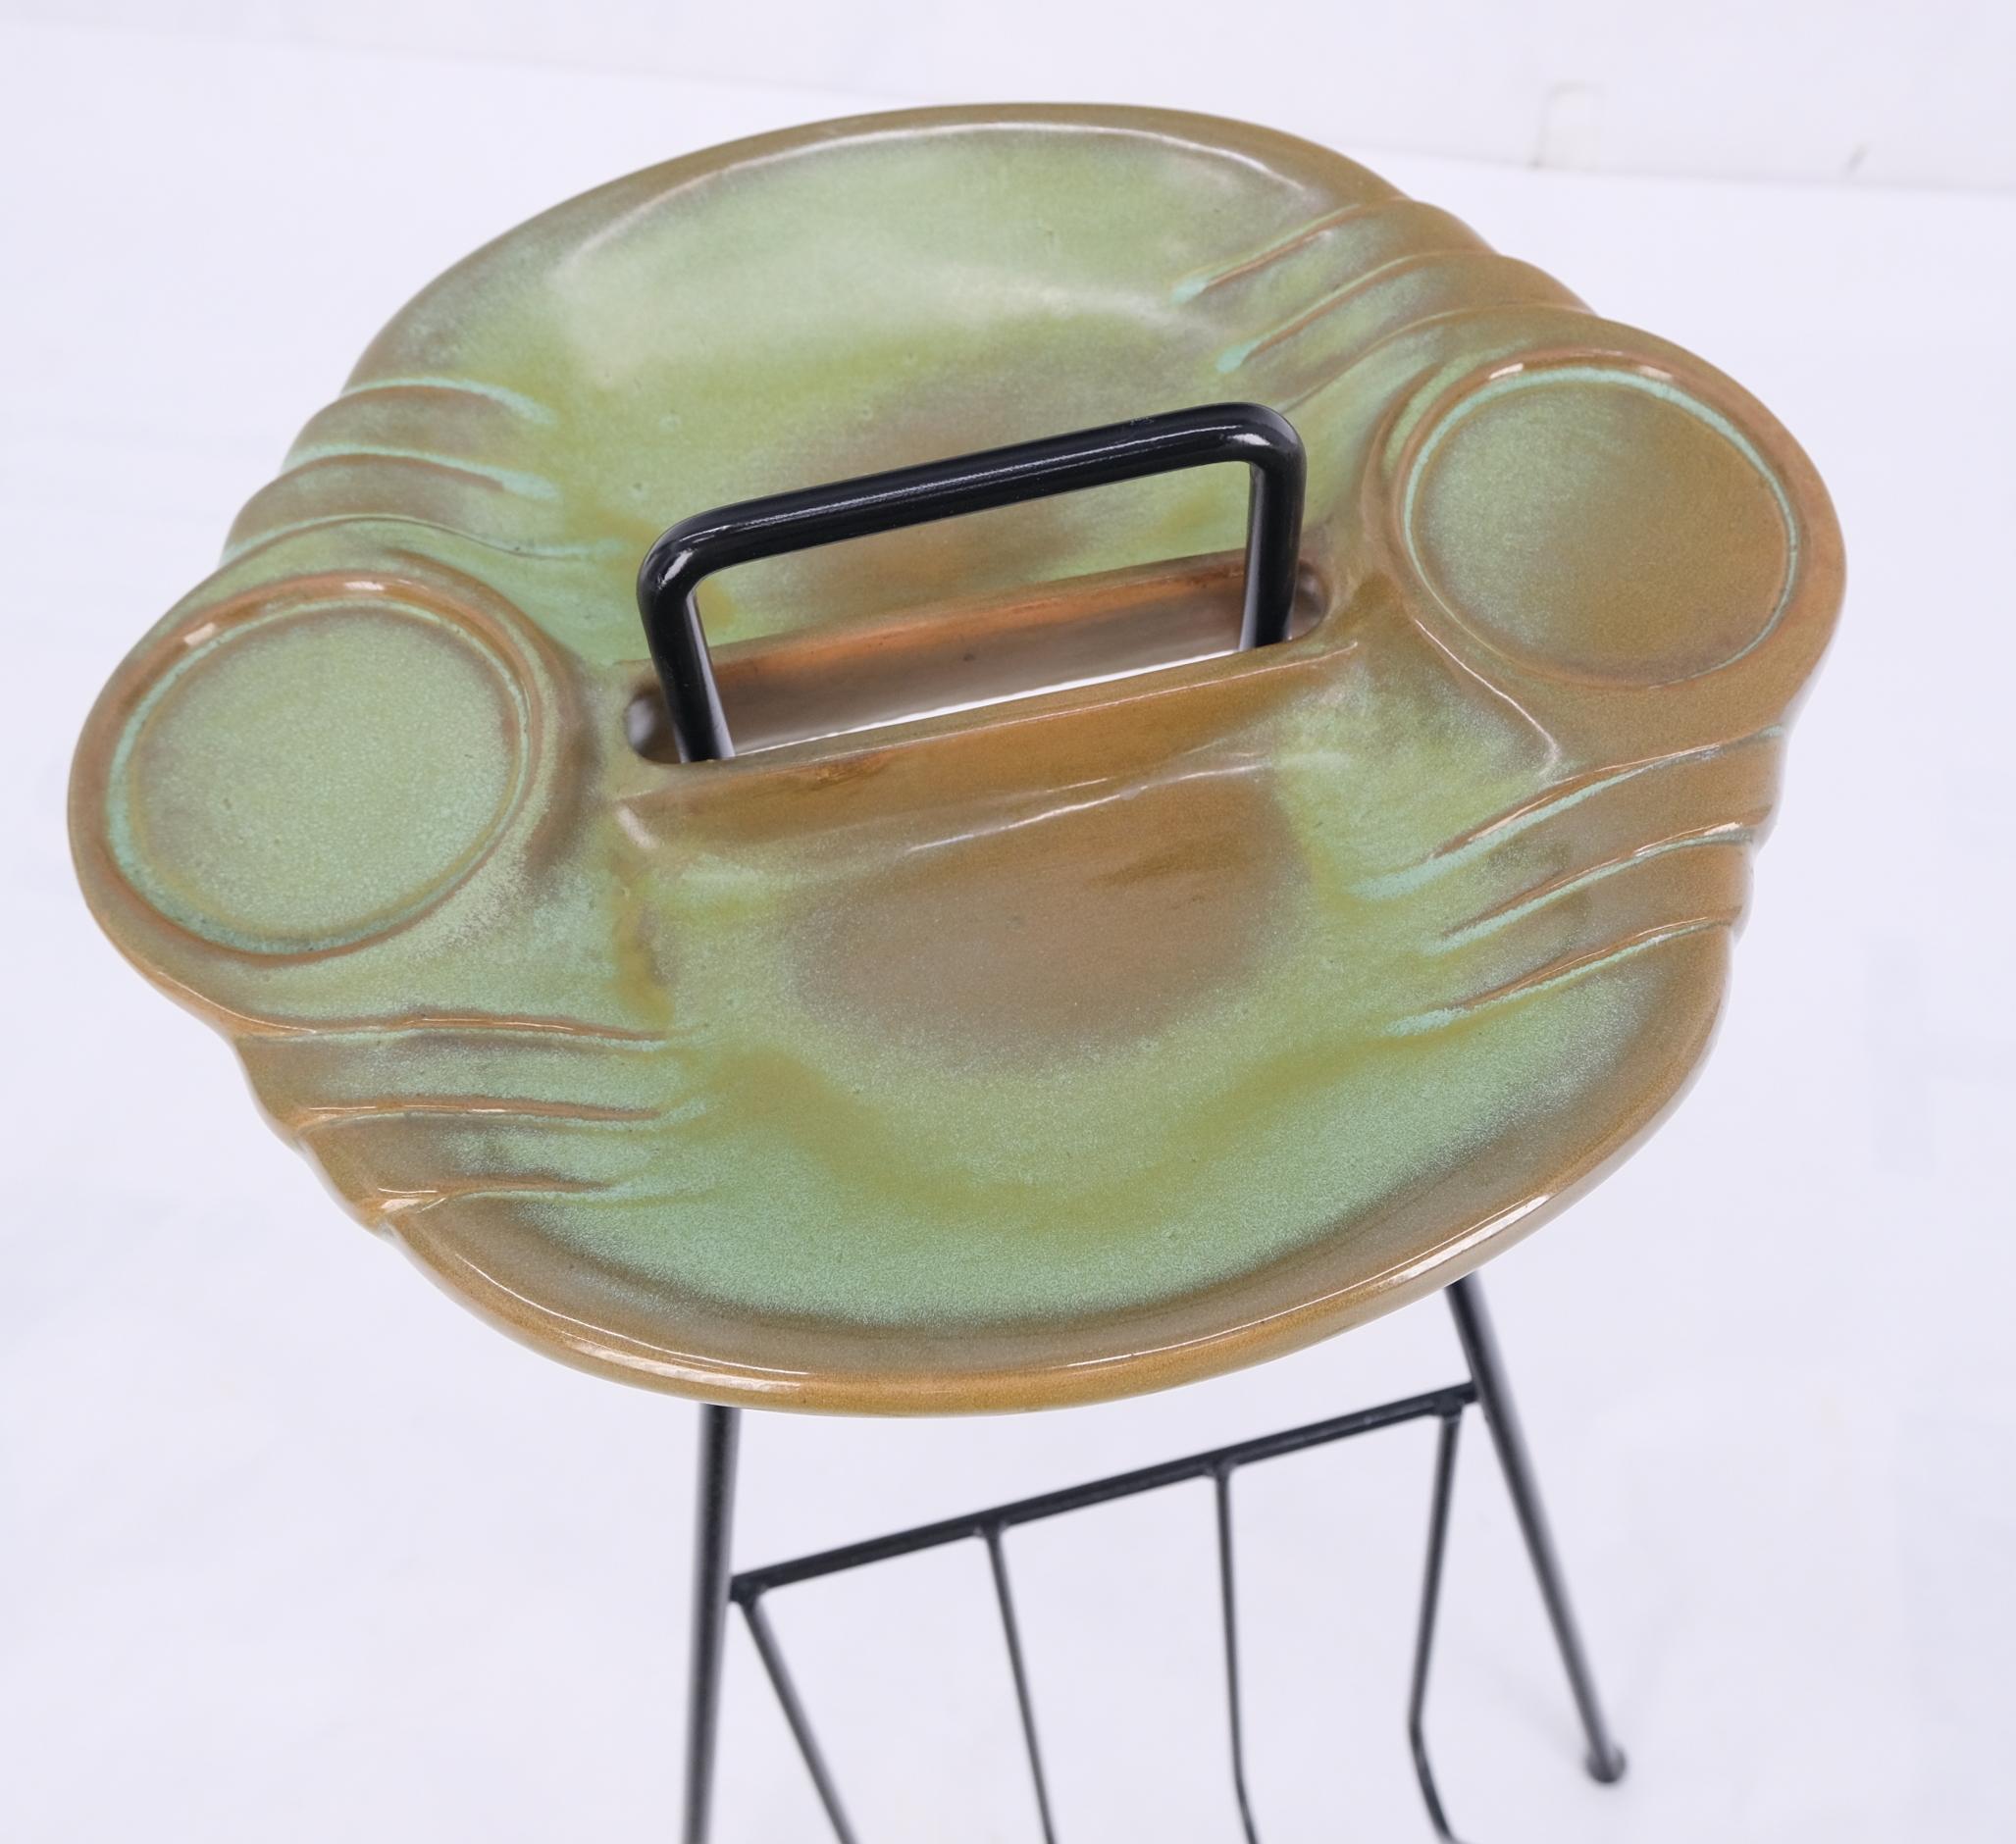 American Mid-Century Modern Ceramic Ashtray on Wire Legs Magazine Rack Stand For Sale